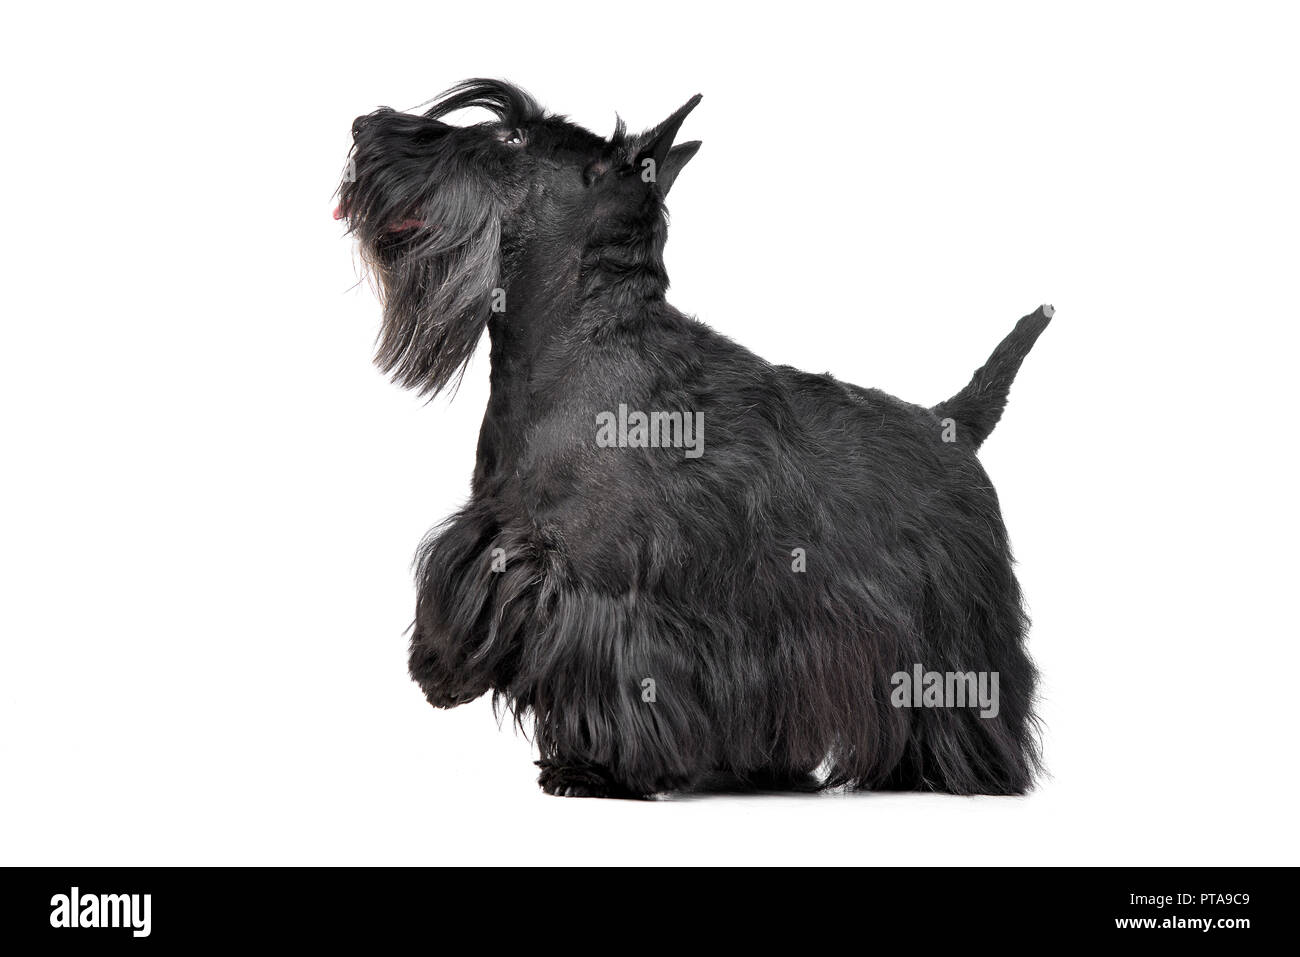 Studio shot of an adorable Scottish terrier standing on white background. Stock Photo